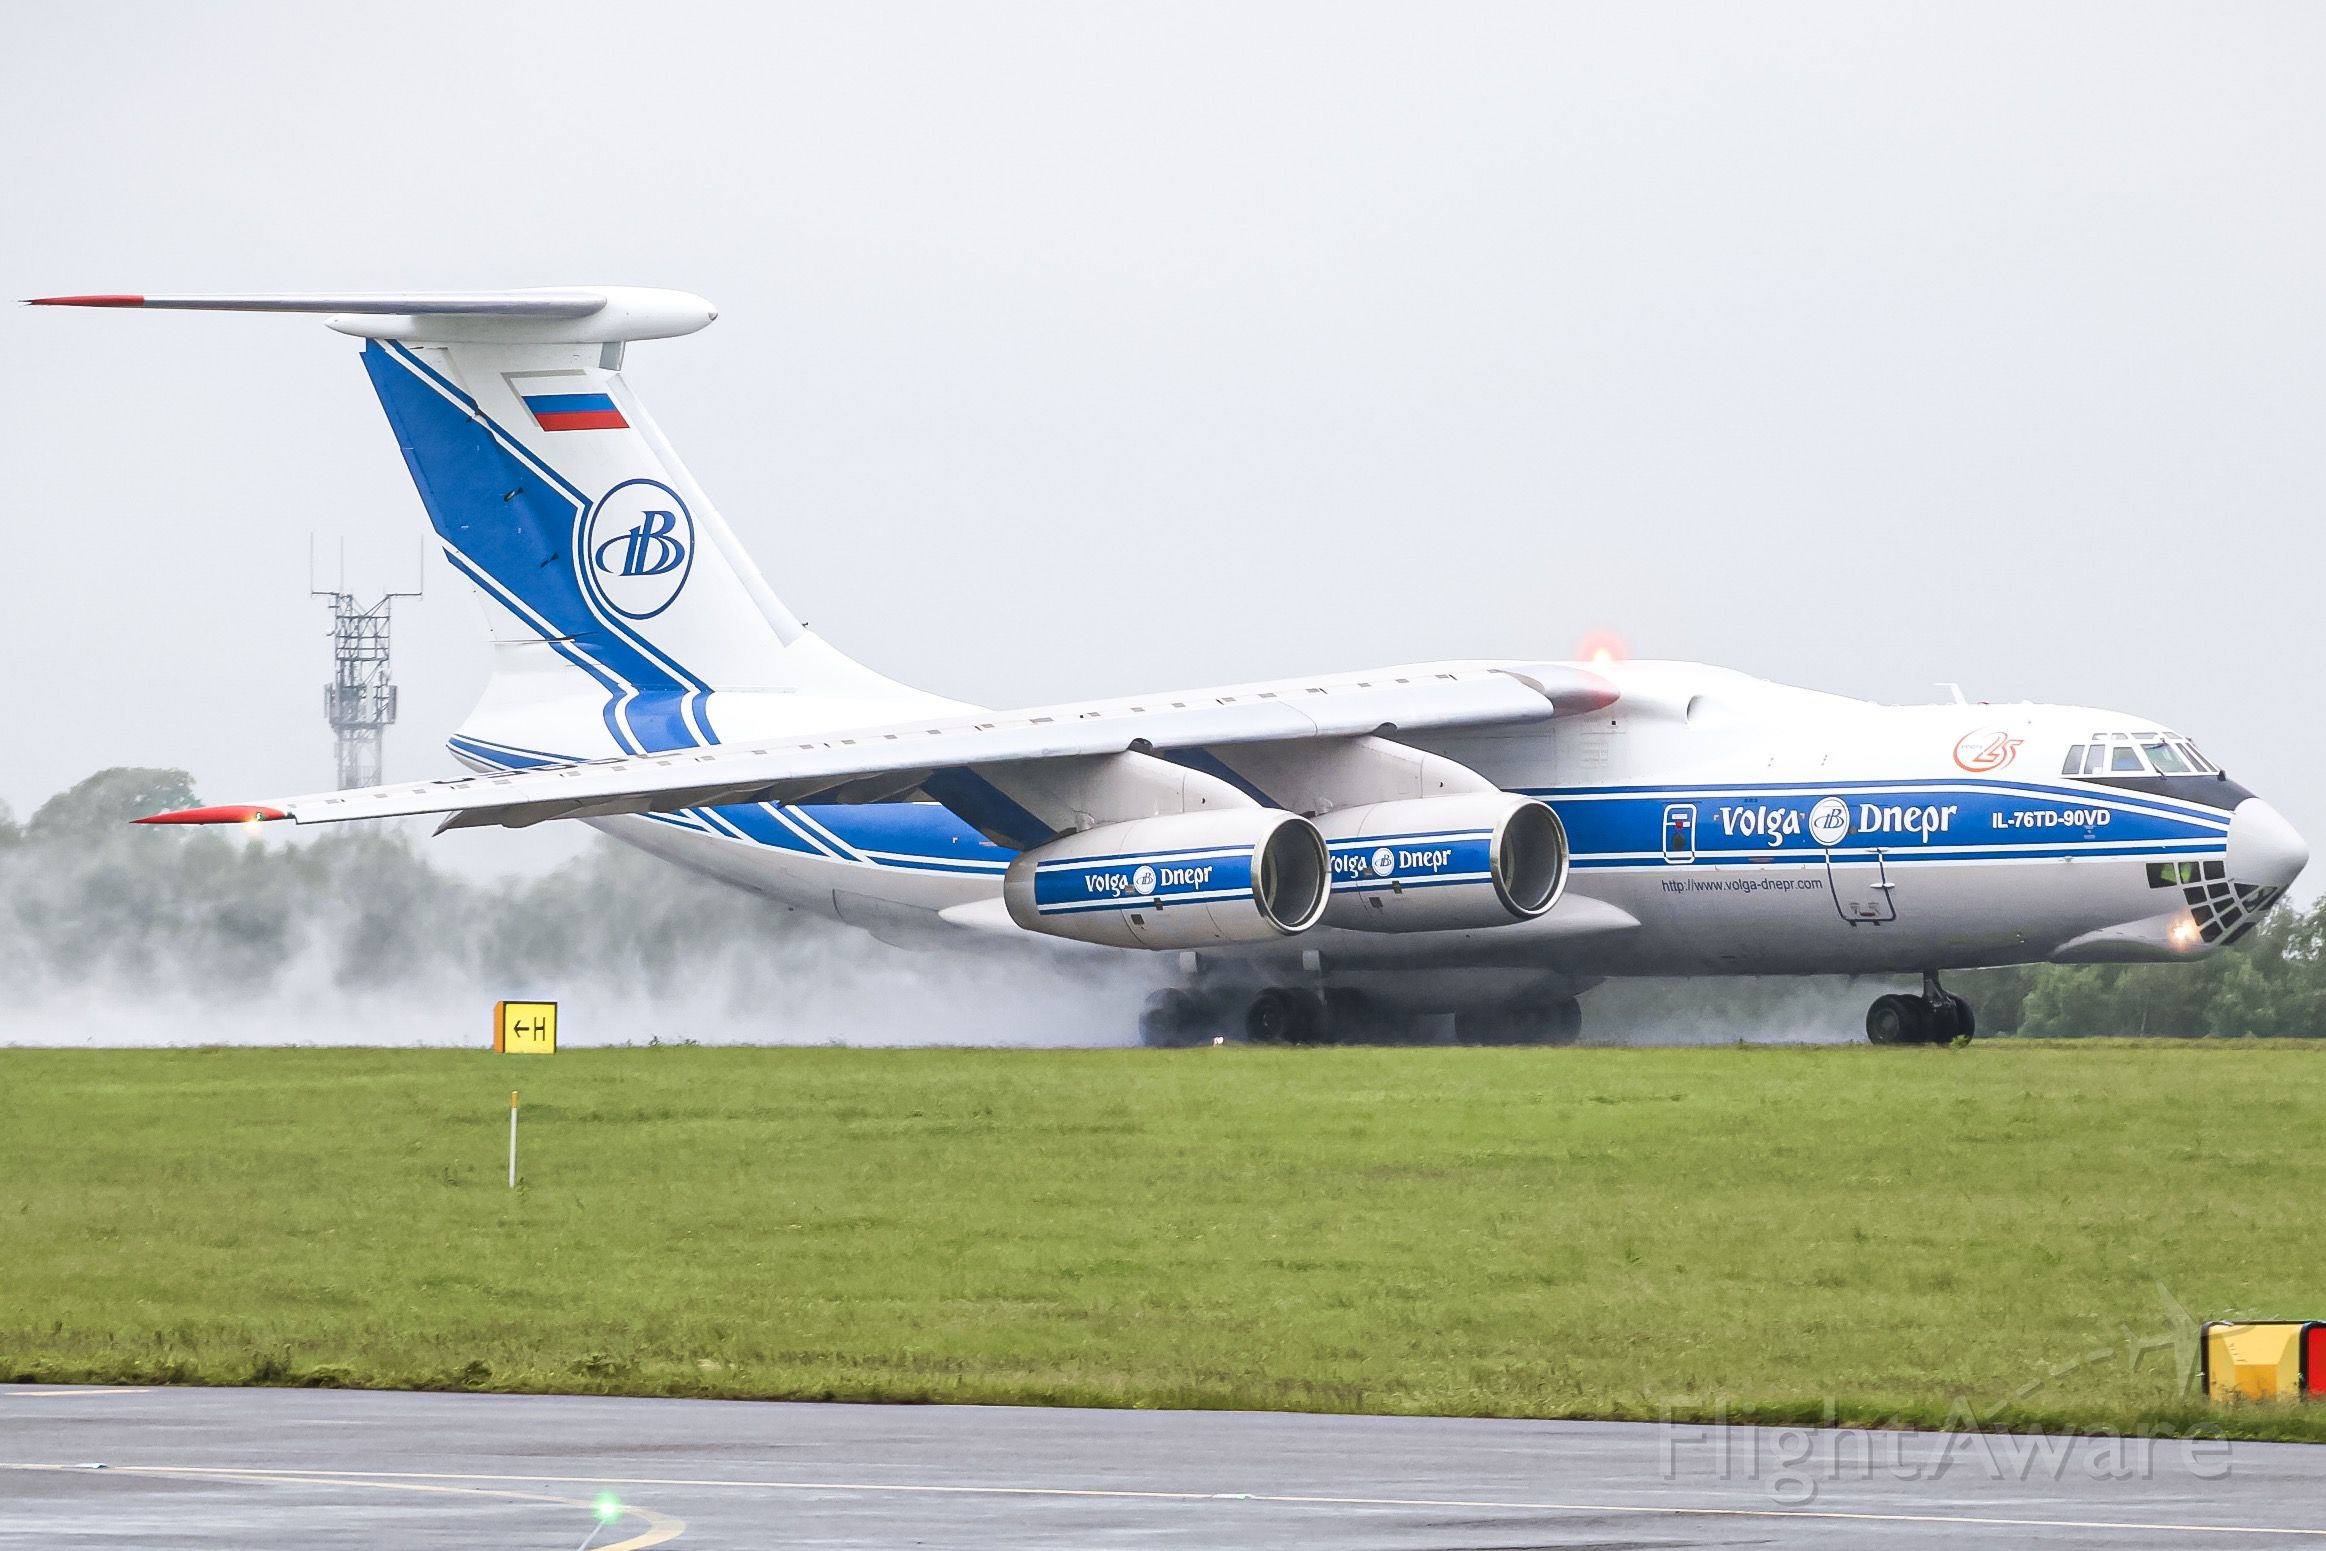 Ilyushin Il-76 (RA-76952) - The first time an Ilyushin has visited the field in over two years so was a welcome treat to the UK’s super cargo hub.